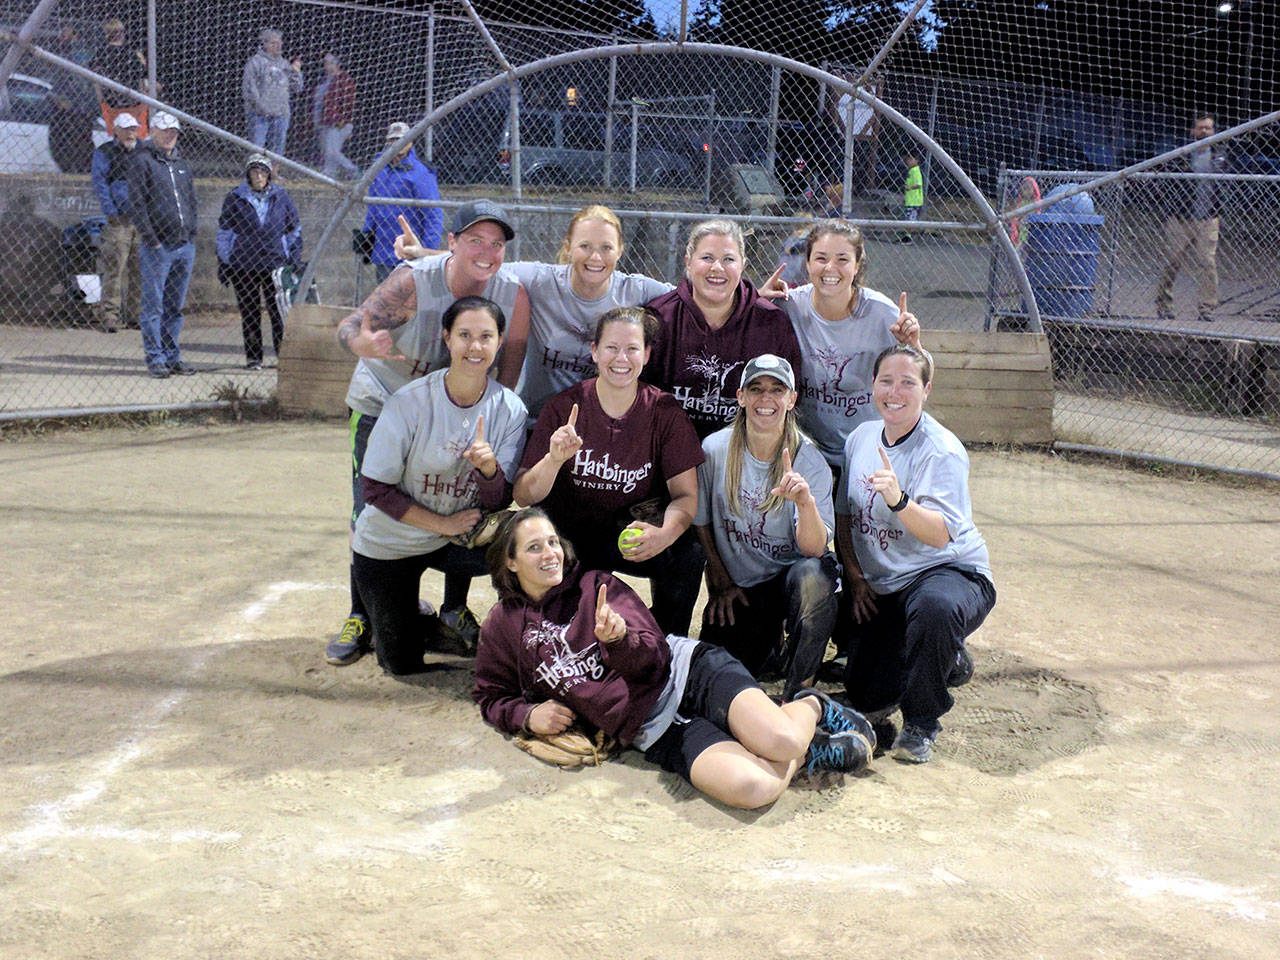 Port Angeles Parks and Recreation                                Harbinger Winery claimed the Port Angeles Parks and Recreation Women’s DivisionChampionship with nine players instead of the usual 10. Taya Black crow played firstand second base. Team members are: back row, from left, Katie Longmire, Jessica Berry,Kristin Dougherty, Molly Brown; front, Taya Black Crow, Stef Anderson, Joelle Munger,Erin Clawson and Hailey Weatherbie (on ground).